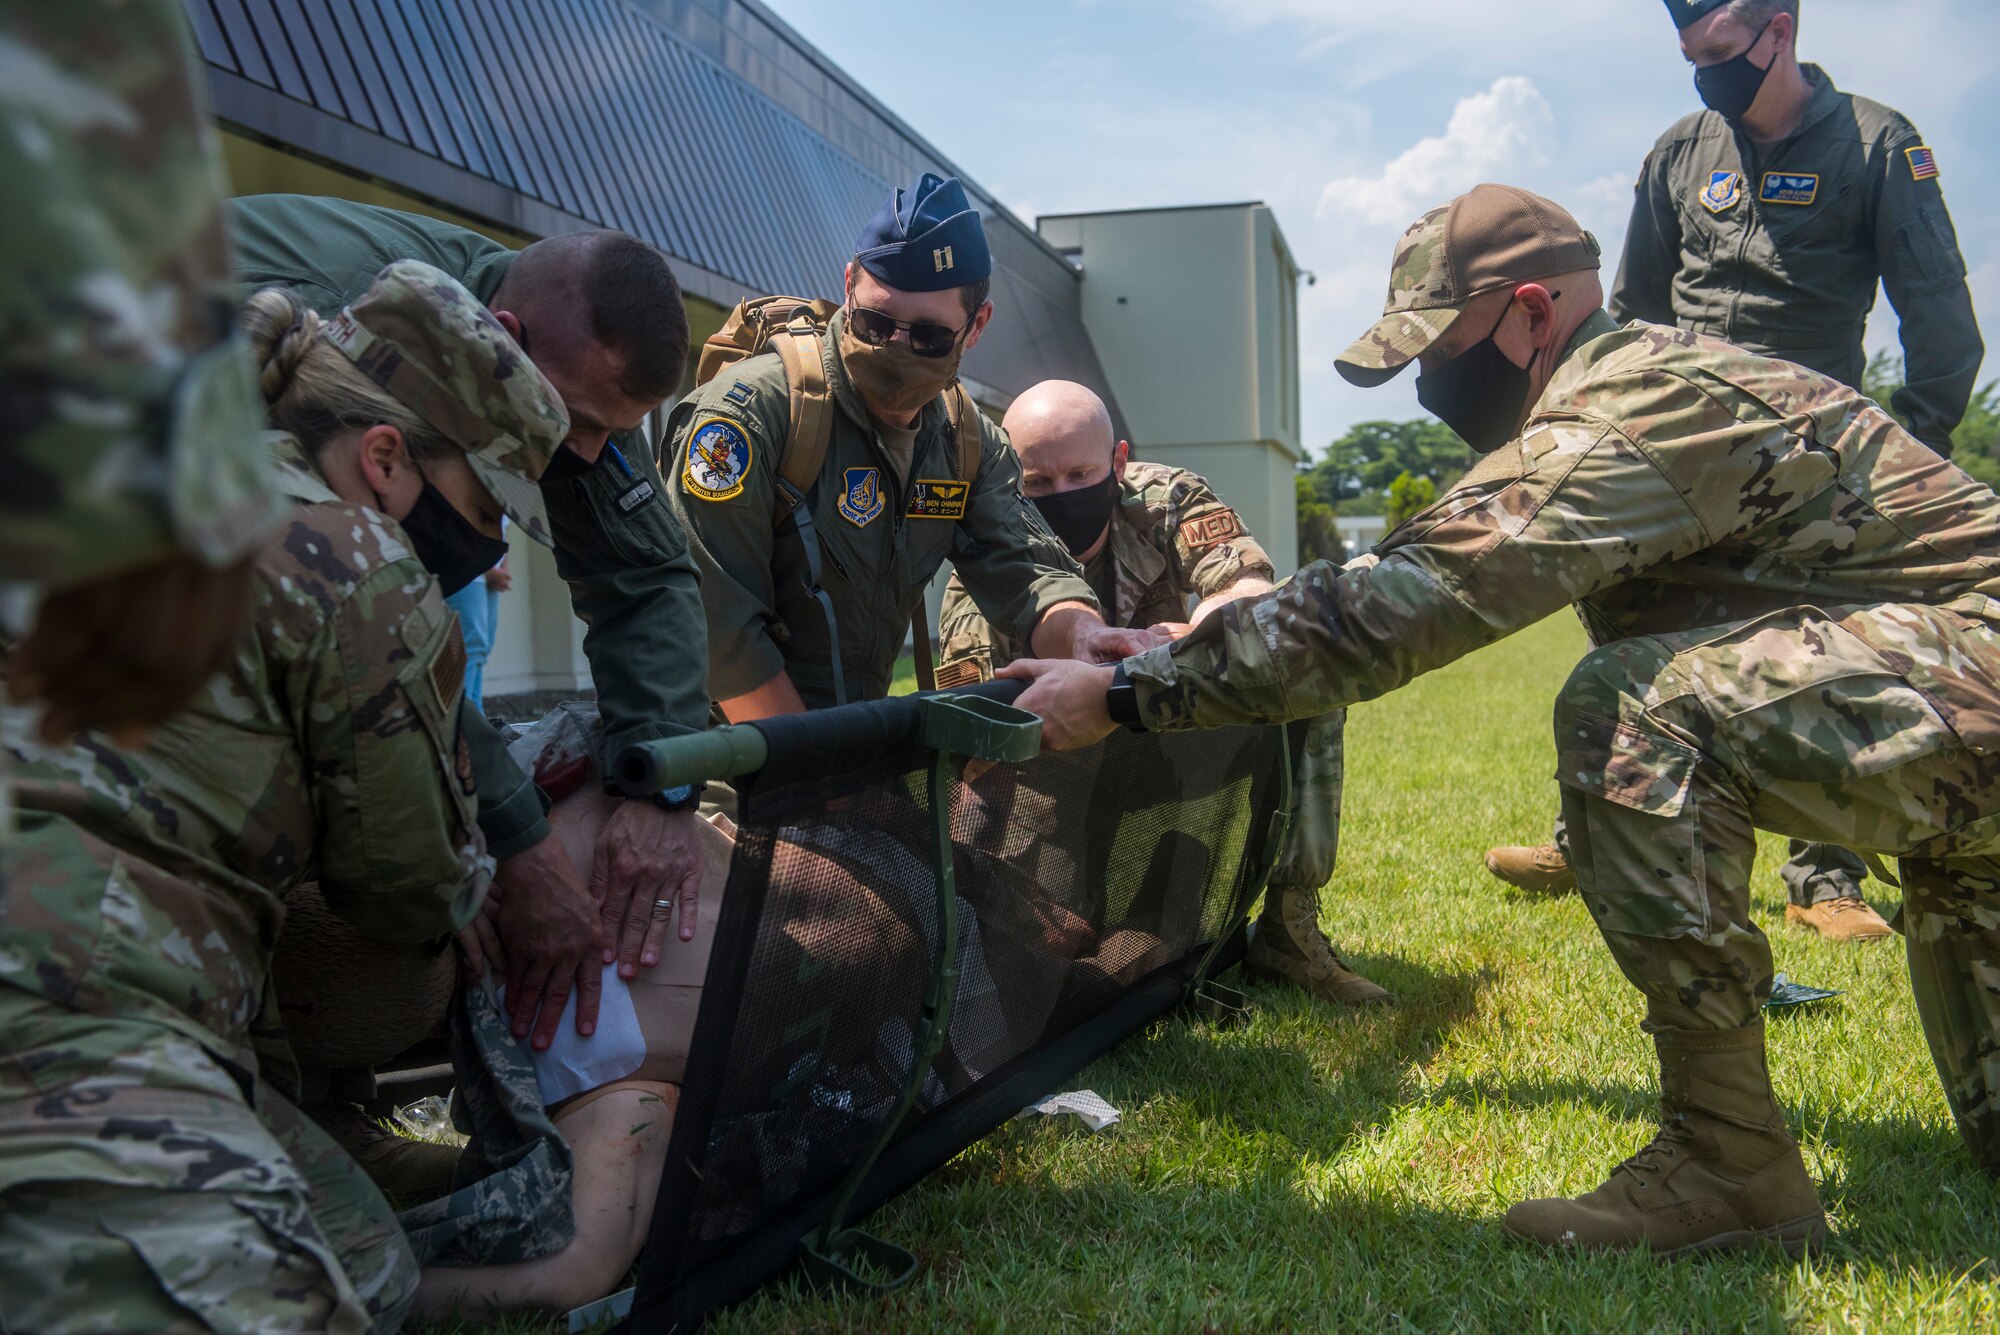 Group of servicemembers apply medical aid to a simulated patient.